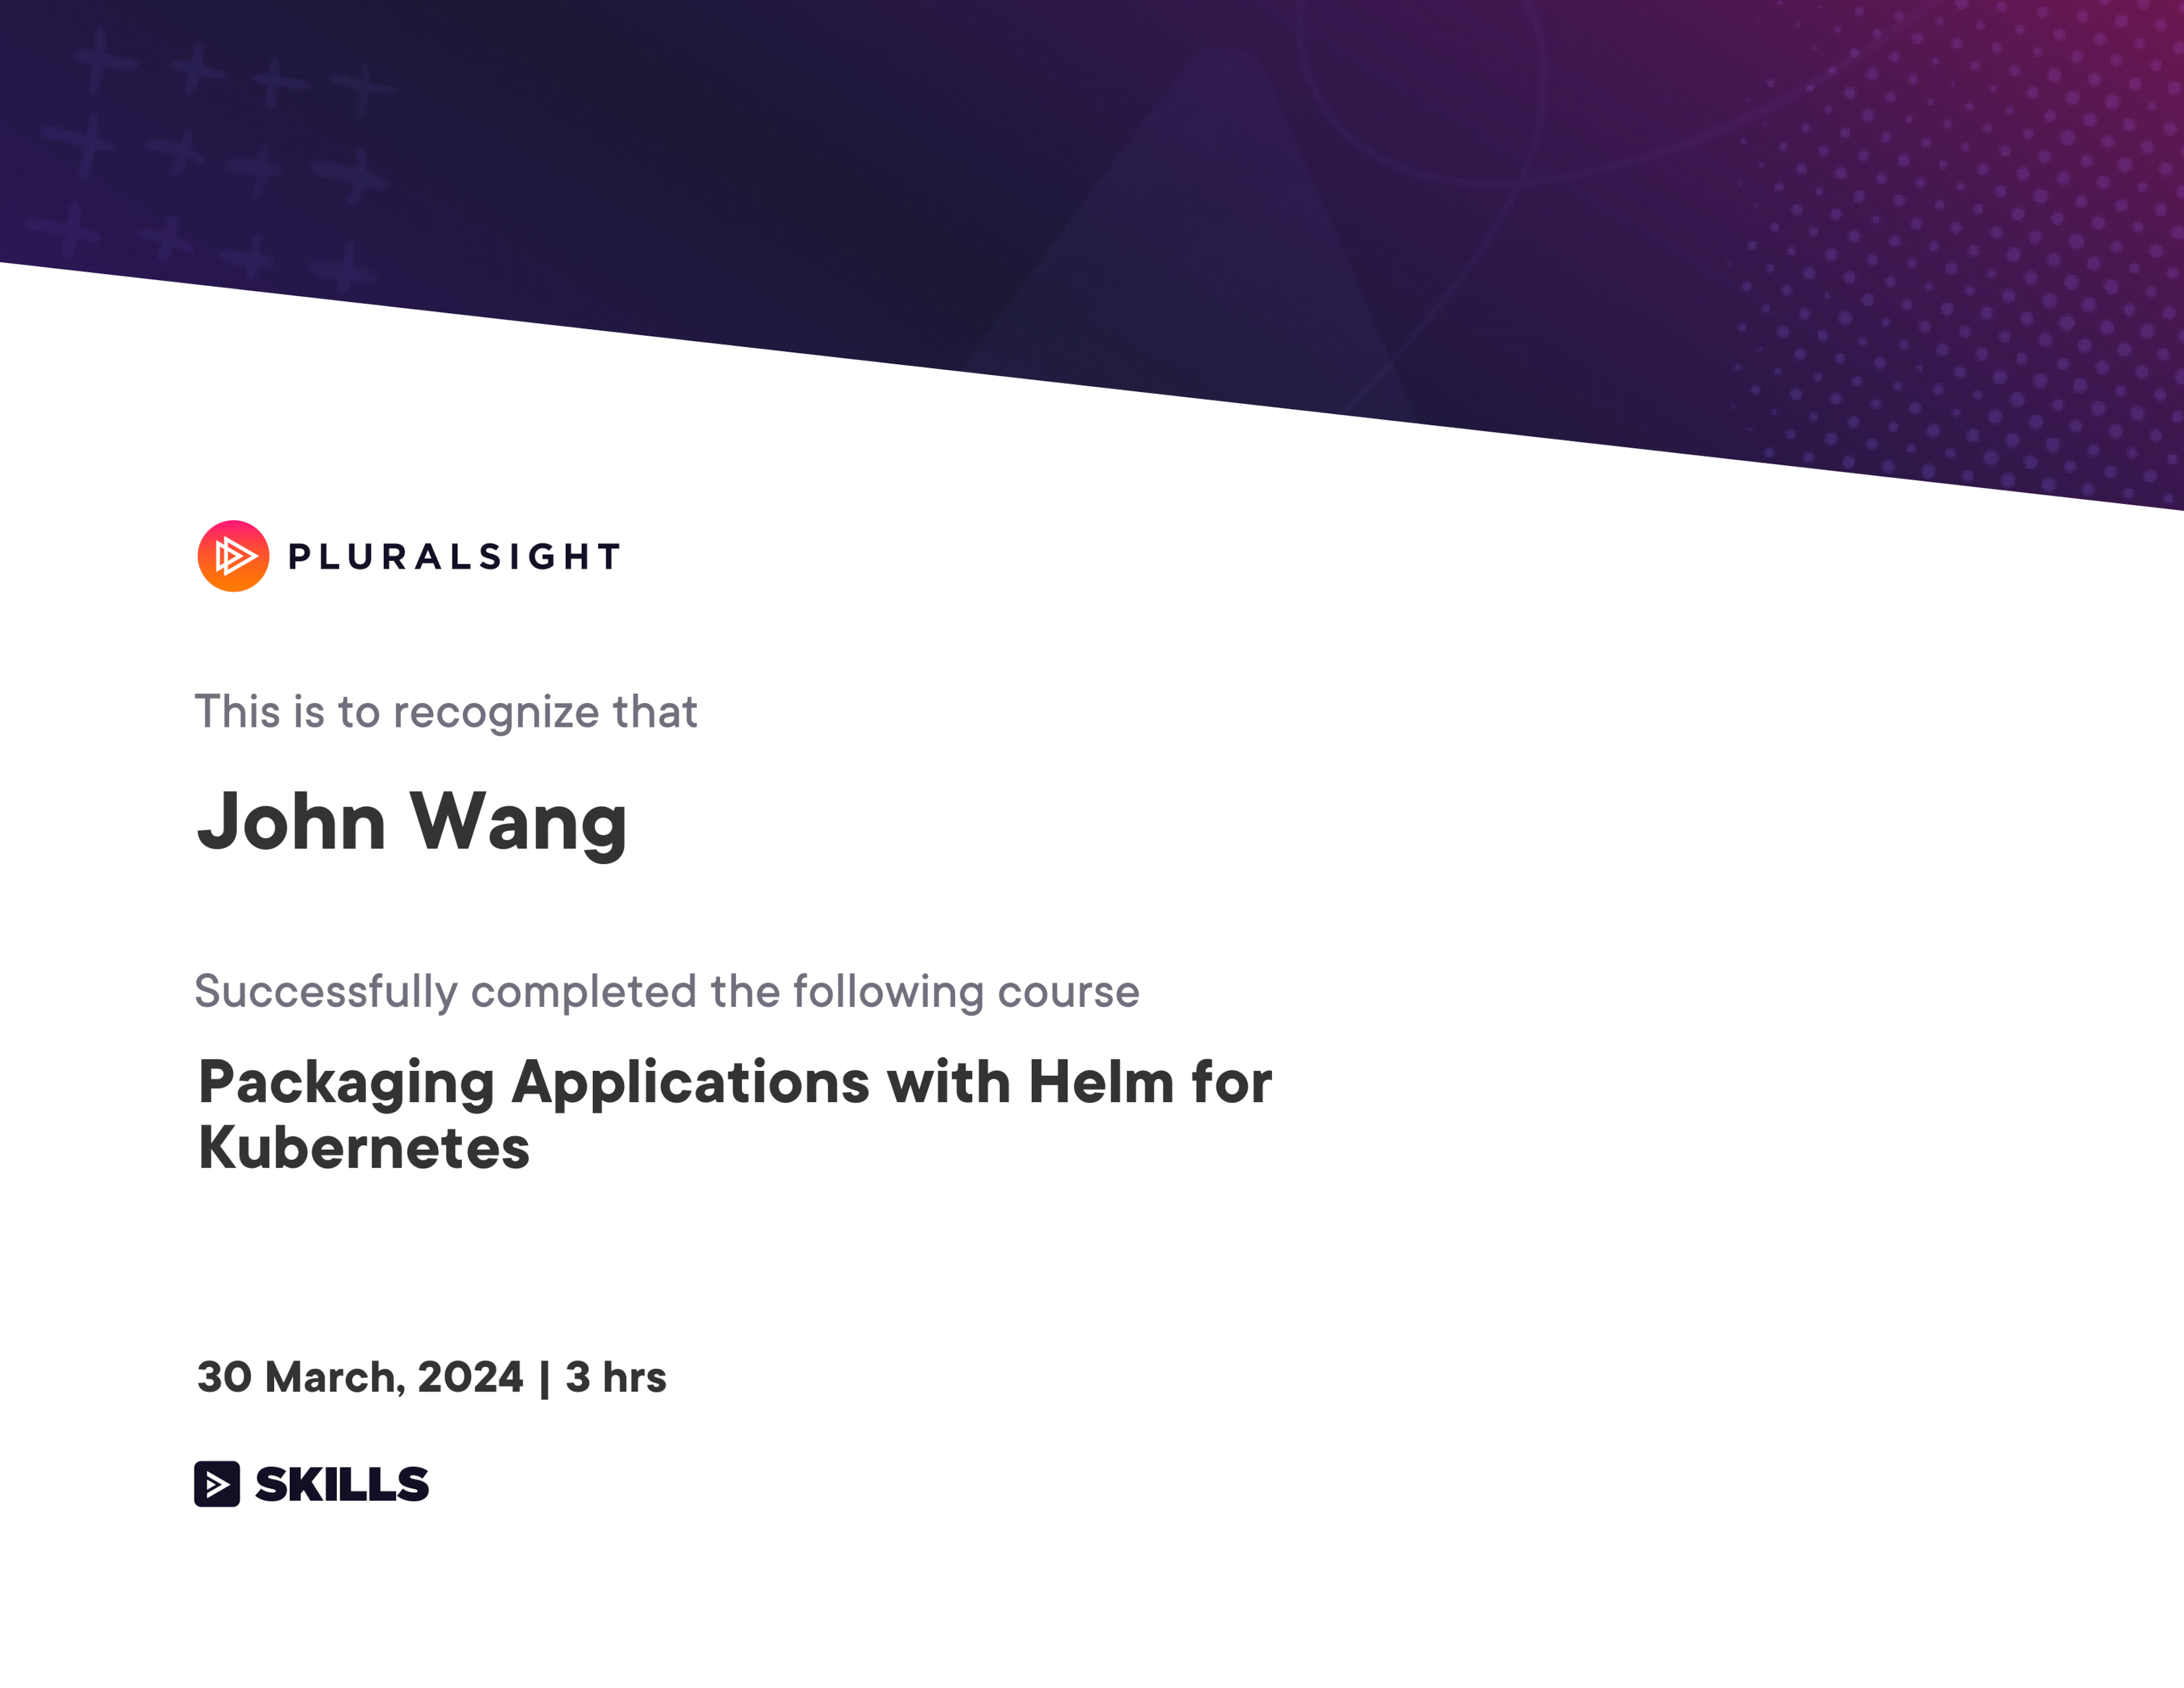 John's Packaging Applications with Helm for Kubernetes from Pluralsight by Philippe Collignon